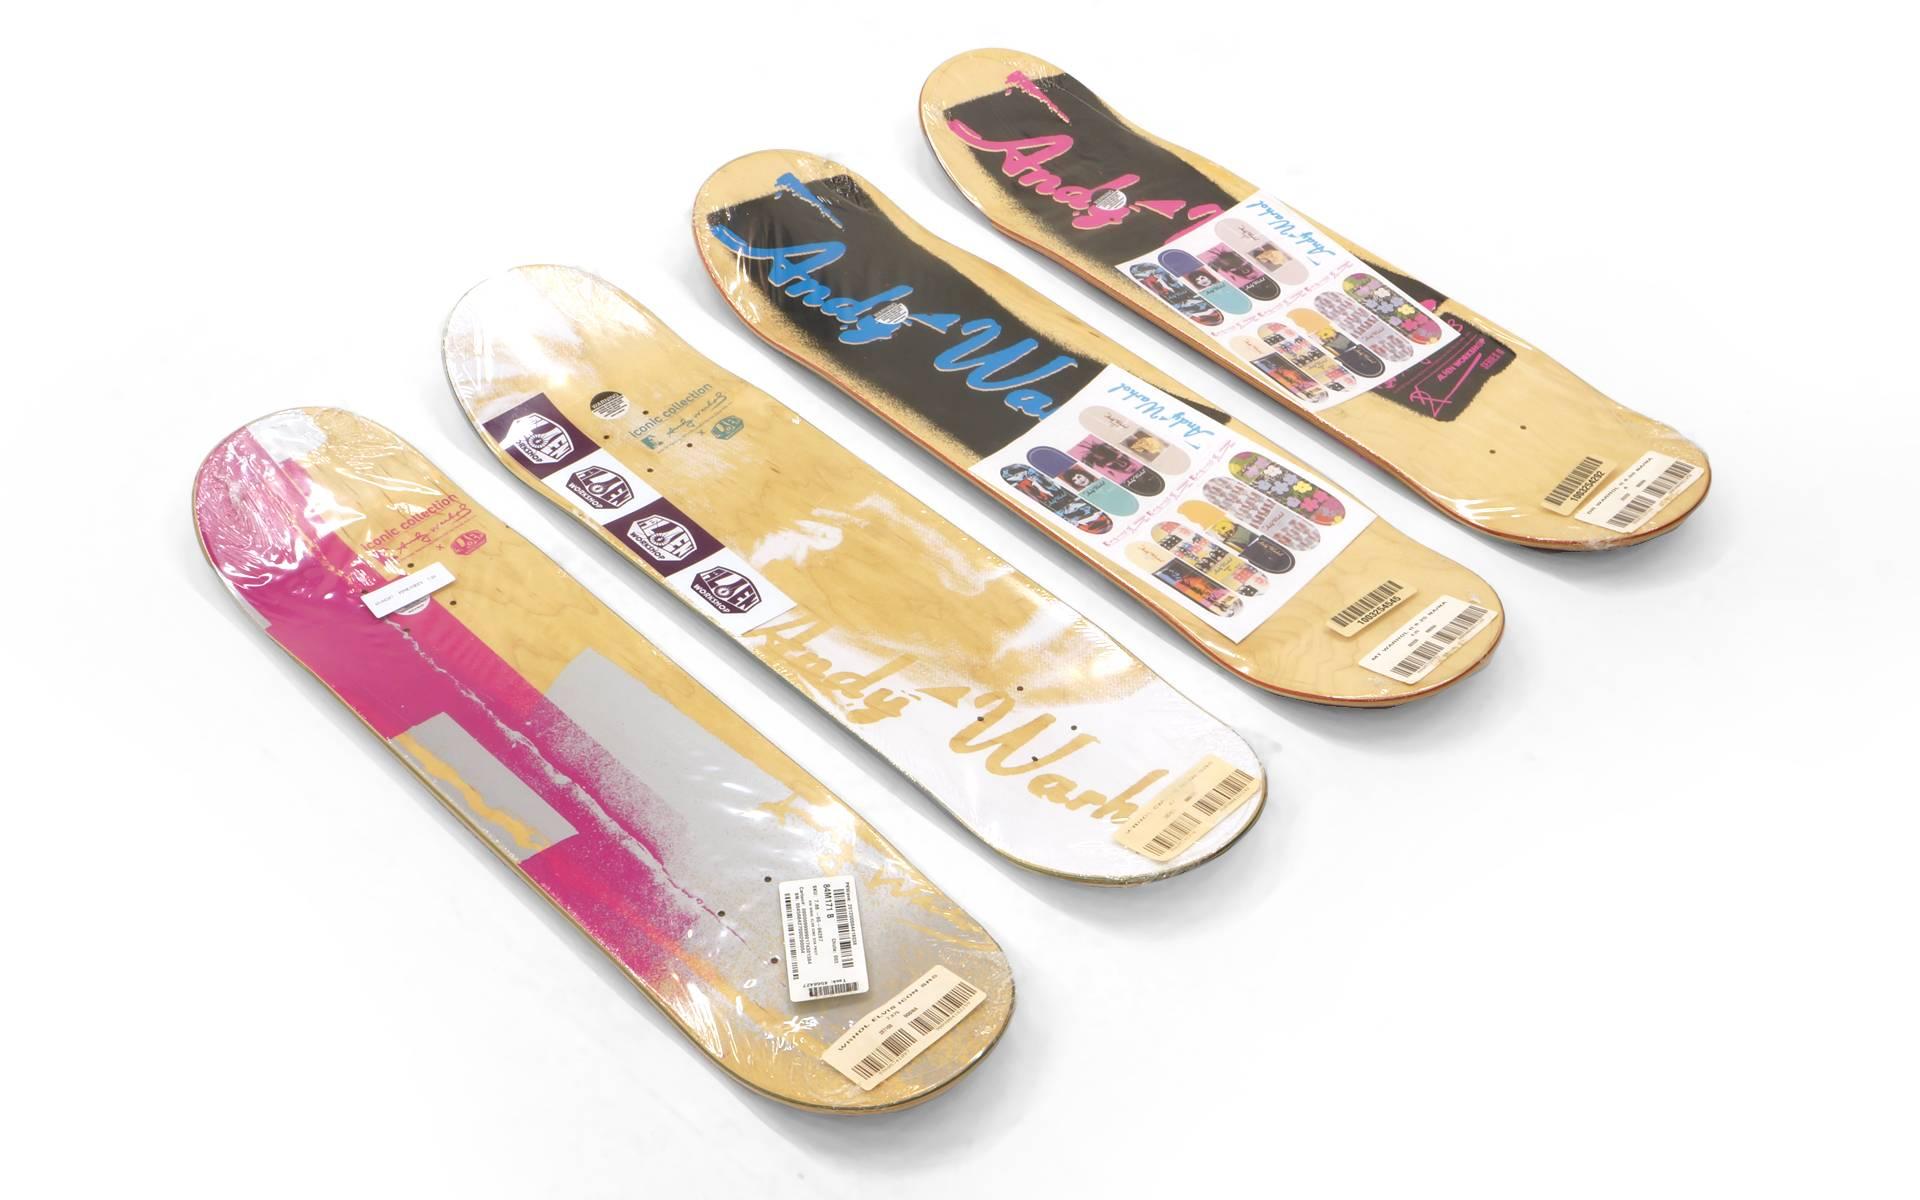 Set of four Andy Warhol skateboard decks from the iconic collection by Allen Workshop. Alien Workshop produced these in collaboration with The Andy Warhol Foundation for the Visual Arts. These examples are still in the original packaging. Great to